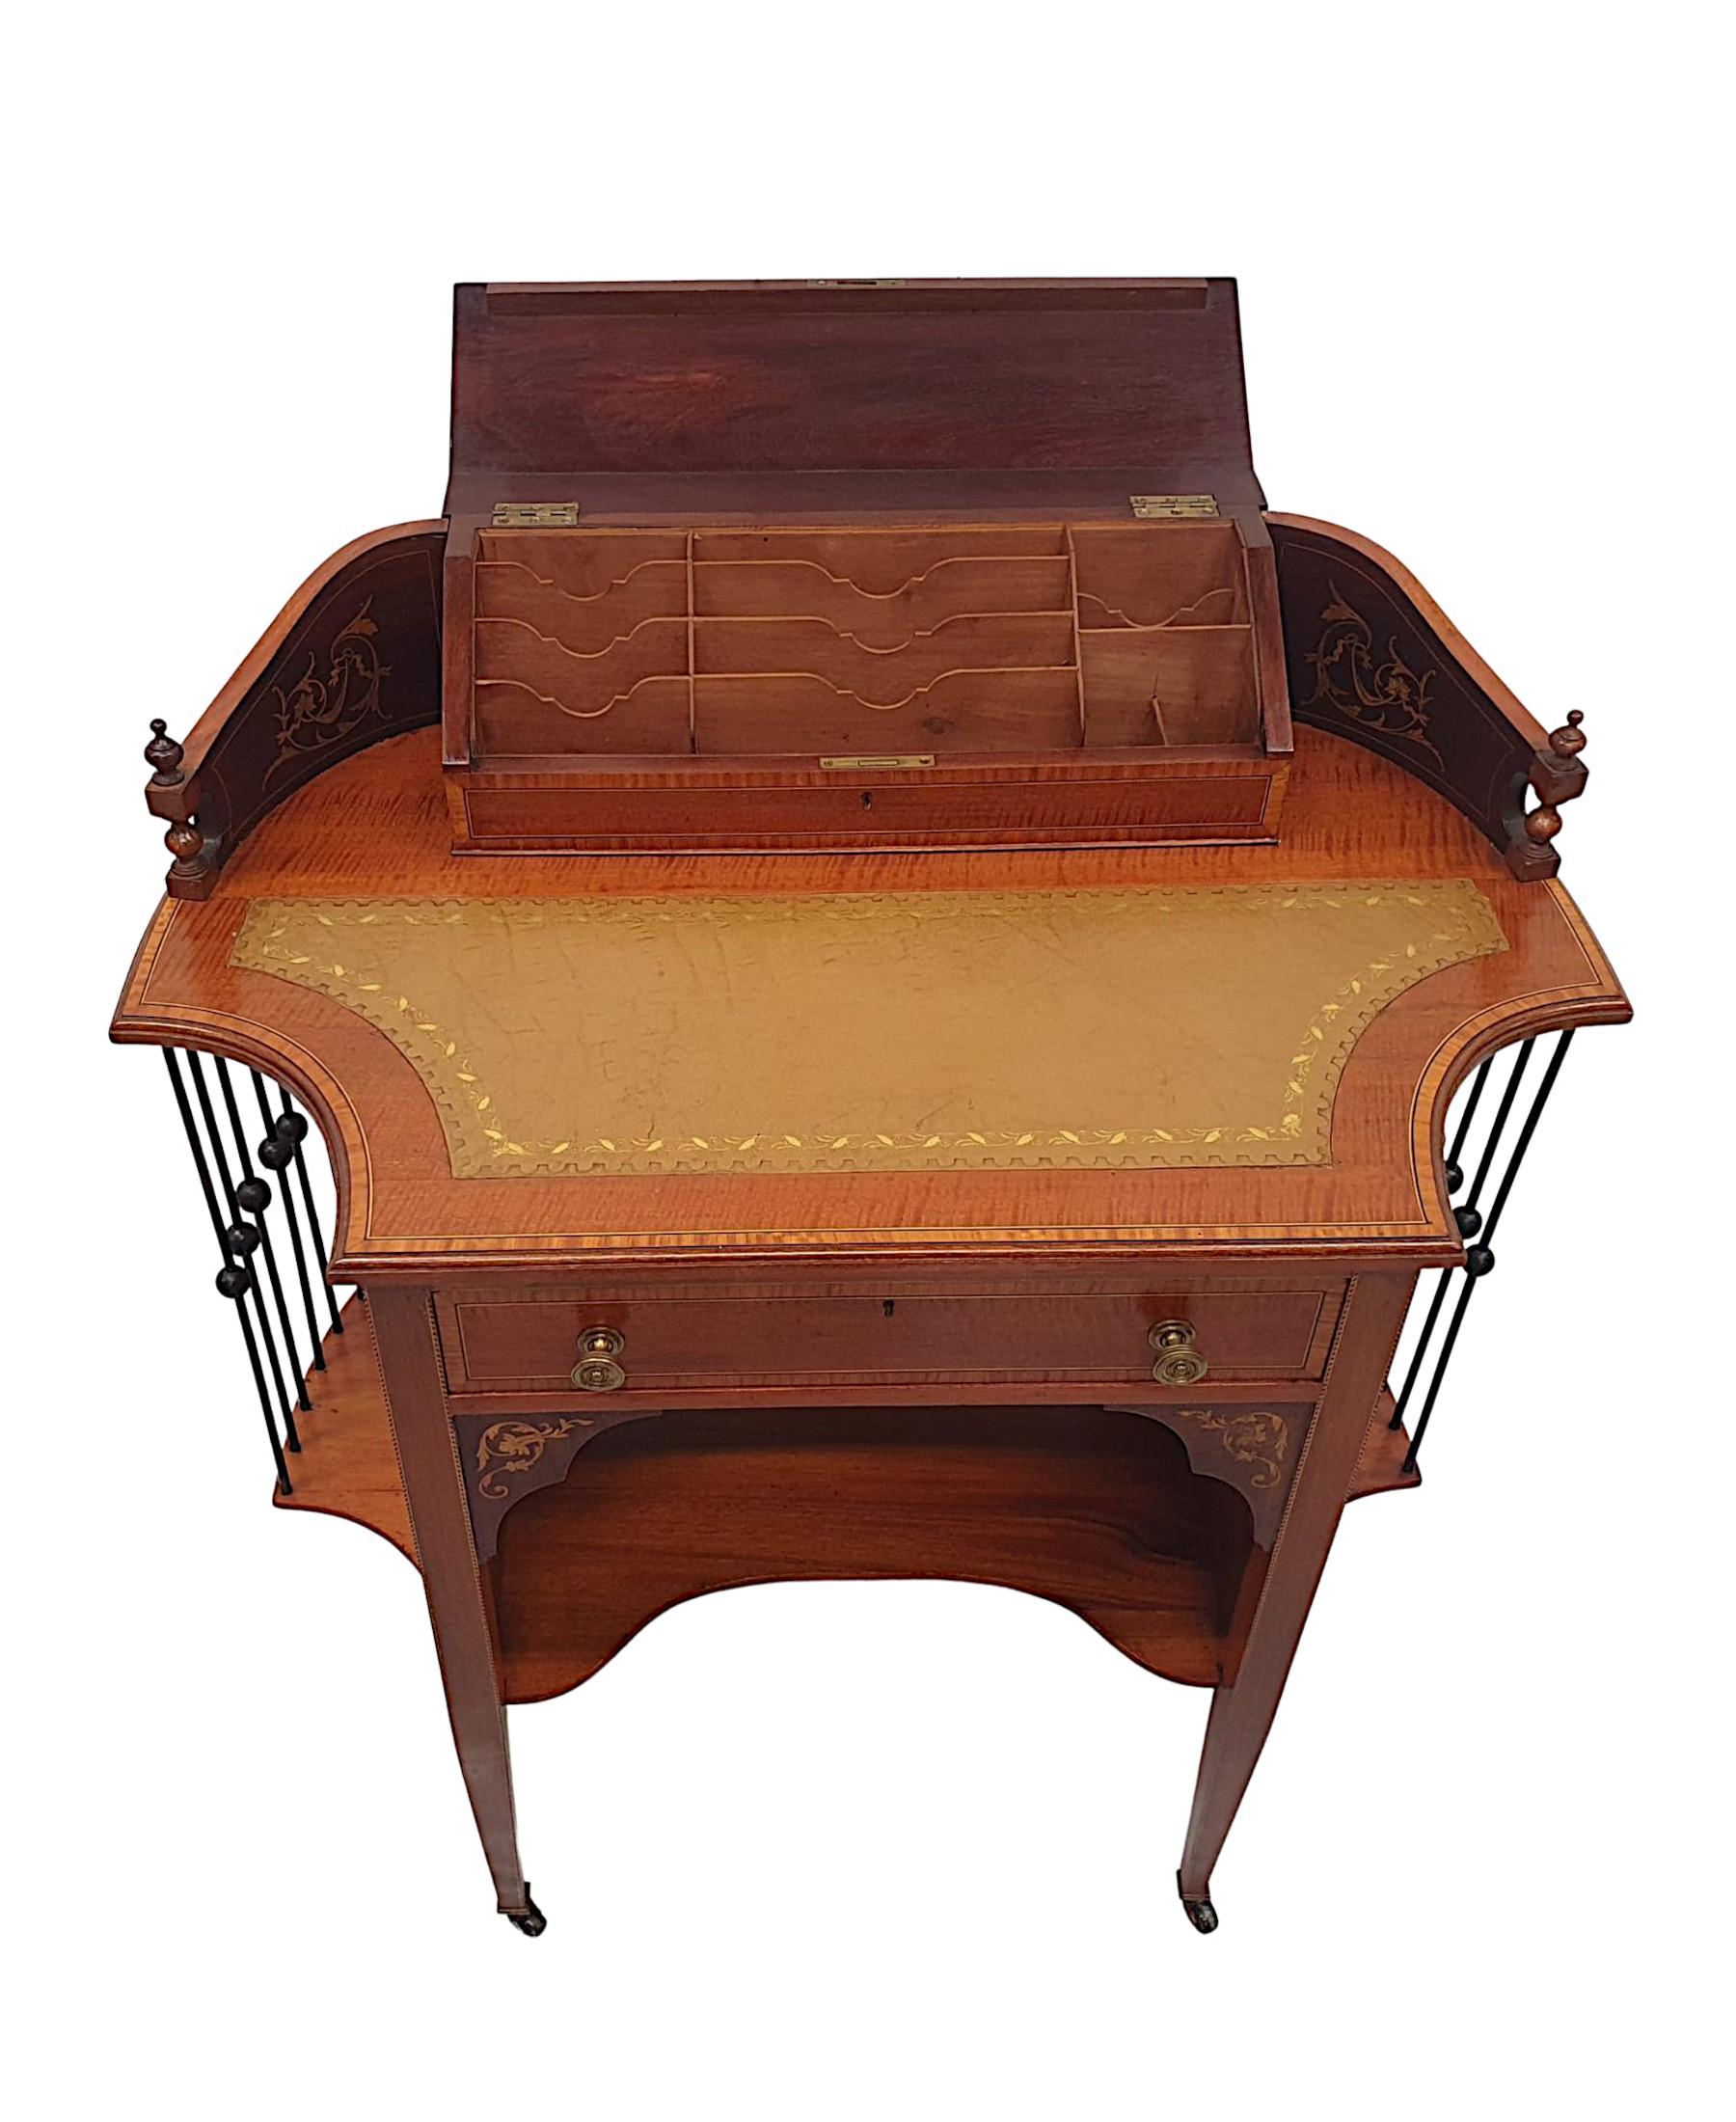 Fine and Unusual Edwardian Inlaid Leather Top Desk In Good Condition For Sale In Dublin, IE